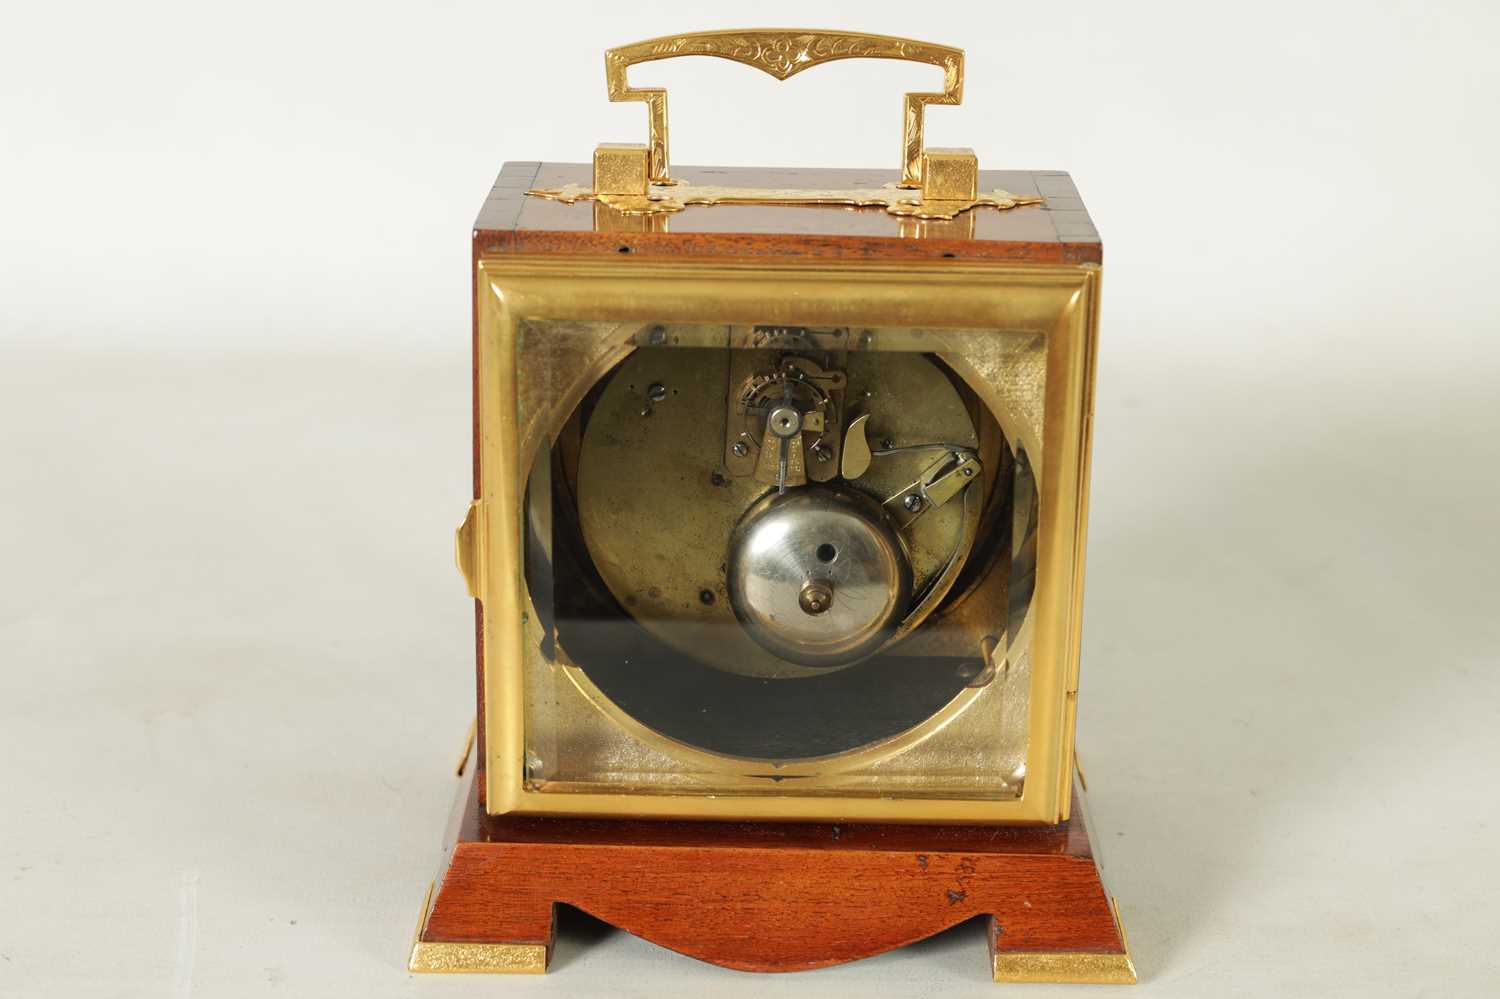 ROBERT BRYSON, EDINBURGH. A LATE 19TH CENTURY DOUBLE FUSEE CARRIAGE TYPE MANTEL CLOCK - Image 7 of 11